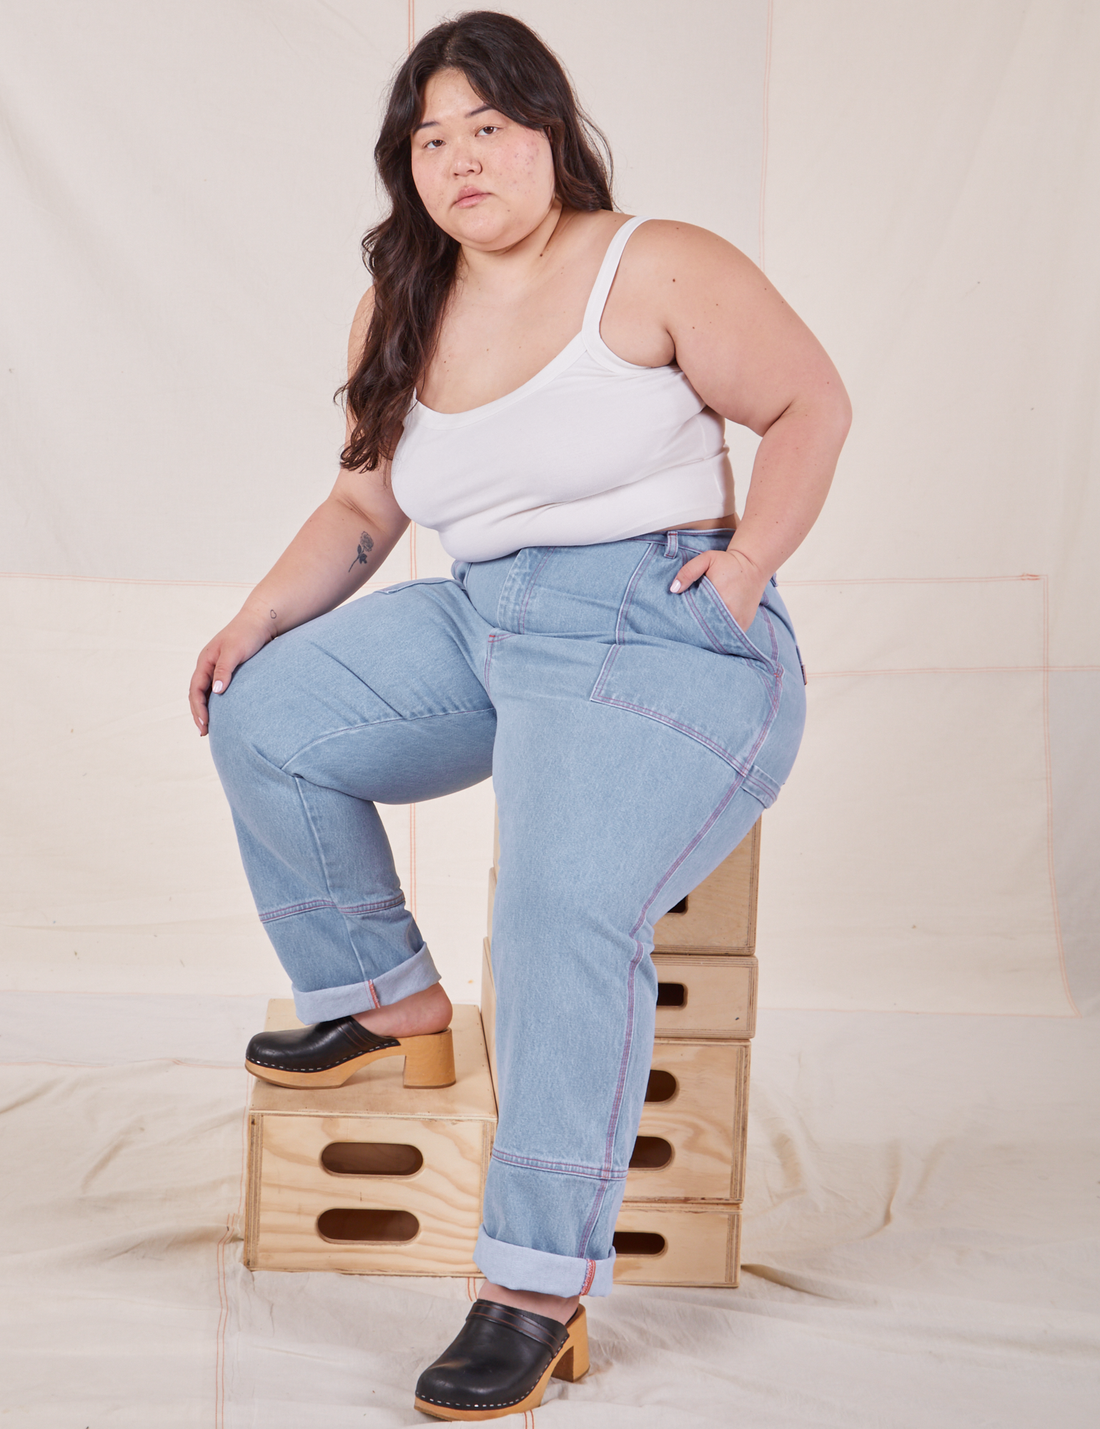 Ashley is sitting on a stack of wooden crates wearing Carpenter Jeans in Light Wash